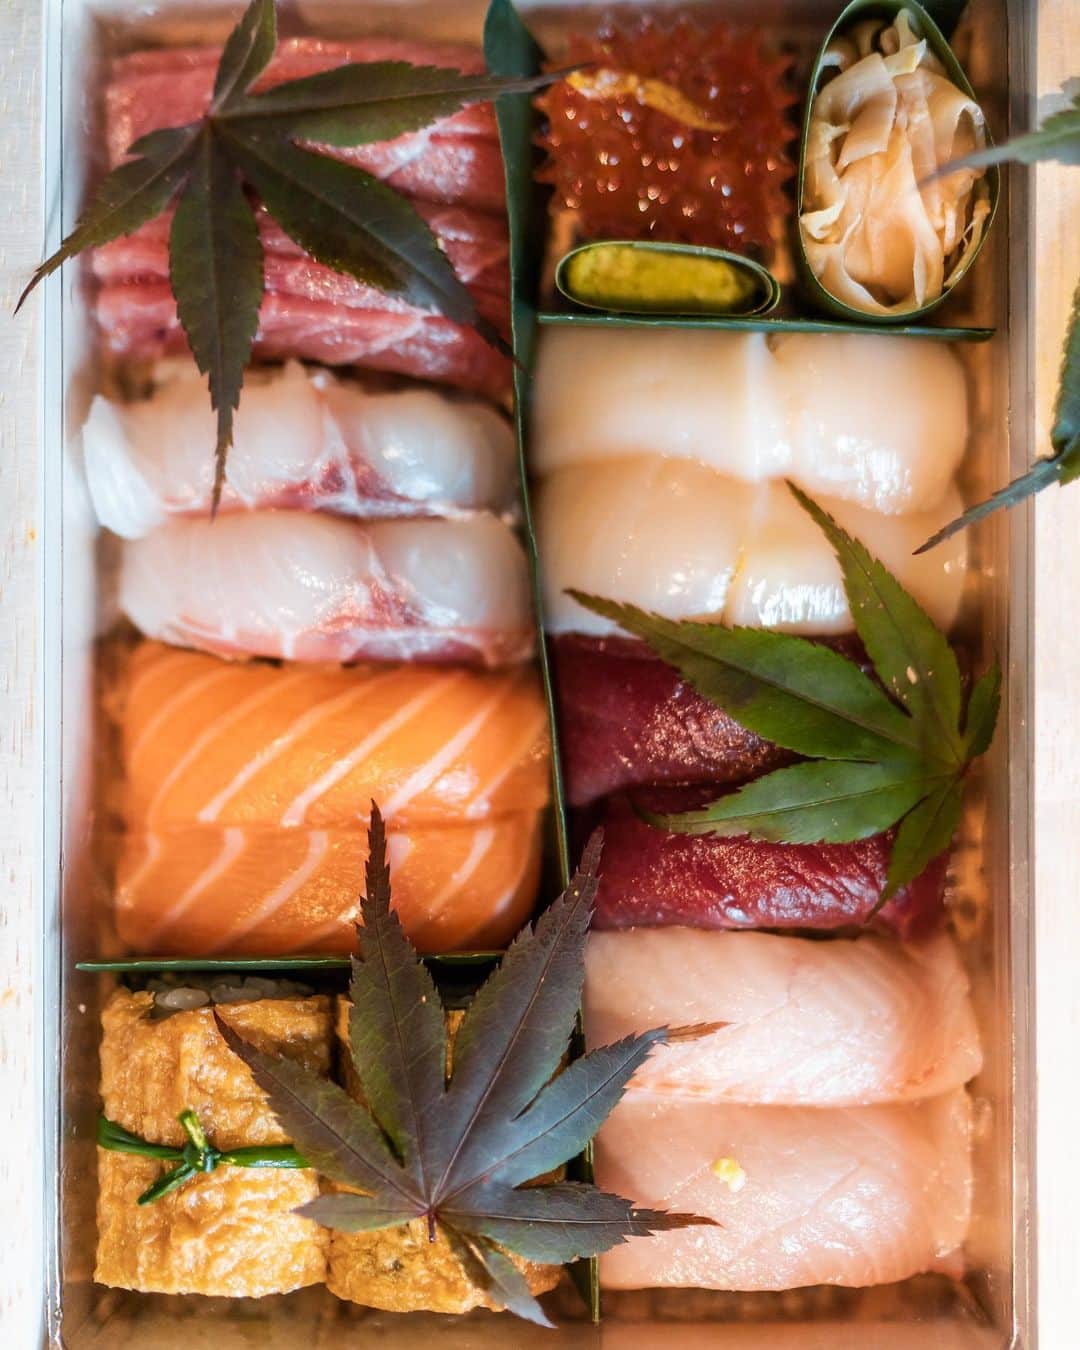 @LONDON | TAG #THISISLONDONさんのインスタグラム写真 - (@LONDON | TAG #THISISLONDONInstagram)「Just received an incredible ornate #BentoBox prepared by #sushi master @MasakiSugisaki of @Dinings_SW3! 😱🍣🔥 These ✨luxury boxes✨are available for delivery Thursday to Saturday only, and need to be ordered 2 days in advance. They include...  • Beluga Caviar 🌟 • Miso Black Cod 🖤 • Oscietra Caviar ✨ • Native Lobster Cake “Shinjo” 🦞  • Dashi infused Vegetable “Nibitashi” 🥕🍅 • “Kasutera” Omelettes w/ Line Caught Cornish Pollack Surimi 🎣 • Sous Vide Duck Breast 🦆  • Roasted A5 Wagyu Beef Fillet 🥩  • Spinach Salad + SUSHI ..... • Bluefin Tuna O-Toro 🐟 • Bluefin Tuna Akami 🐟 • Ross & Cromarty Scottish Salmon 🍣  • Line Caught Sea Bass 🎣  • Yellowtail 🐟  • Hand-Dived Scallops 🐚  + Freshwater Eel 🤗 _____________________________________ Taste the intricate selection of sushi and sashimi from the renowned #Knightsbridge Walton Street restaurant, prepared by Masaki himself... limited availability. Comes with bespoke handmade chopsticks and mother of pearl spoons for caviar tastings. Exquisite! 🙏🏼😱🌟 _____________________________________  #thisislondon #lovelondon #london #londra #londonlife #londres #uk #visitlondon #british #🇬🇧 #foodiesoflondon #londonfoodies #londonfoodie #londonfood 📷 @mrlondon」7月9日 4時09分 - london